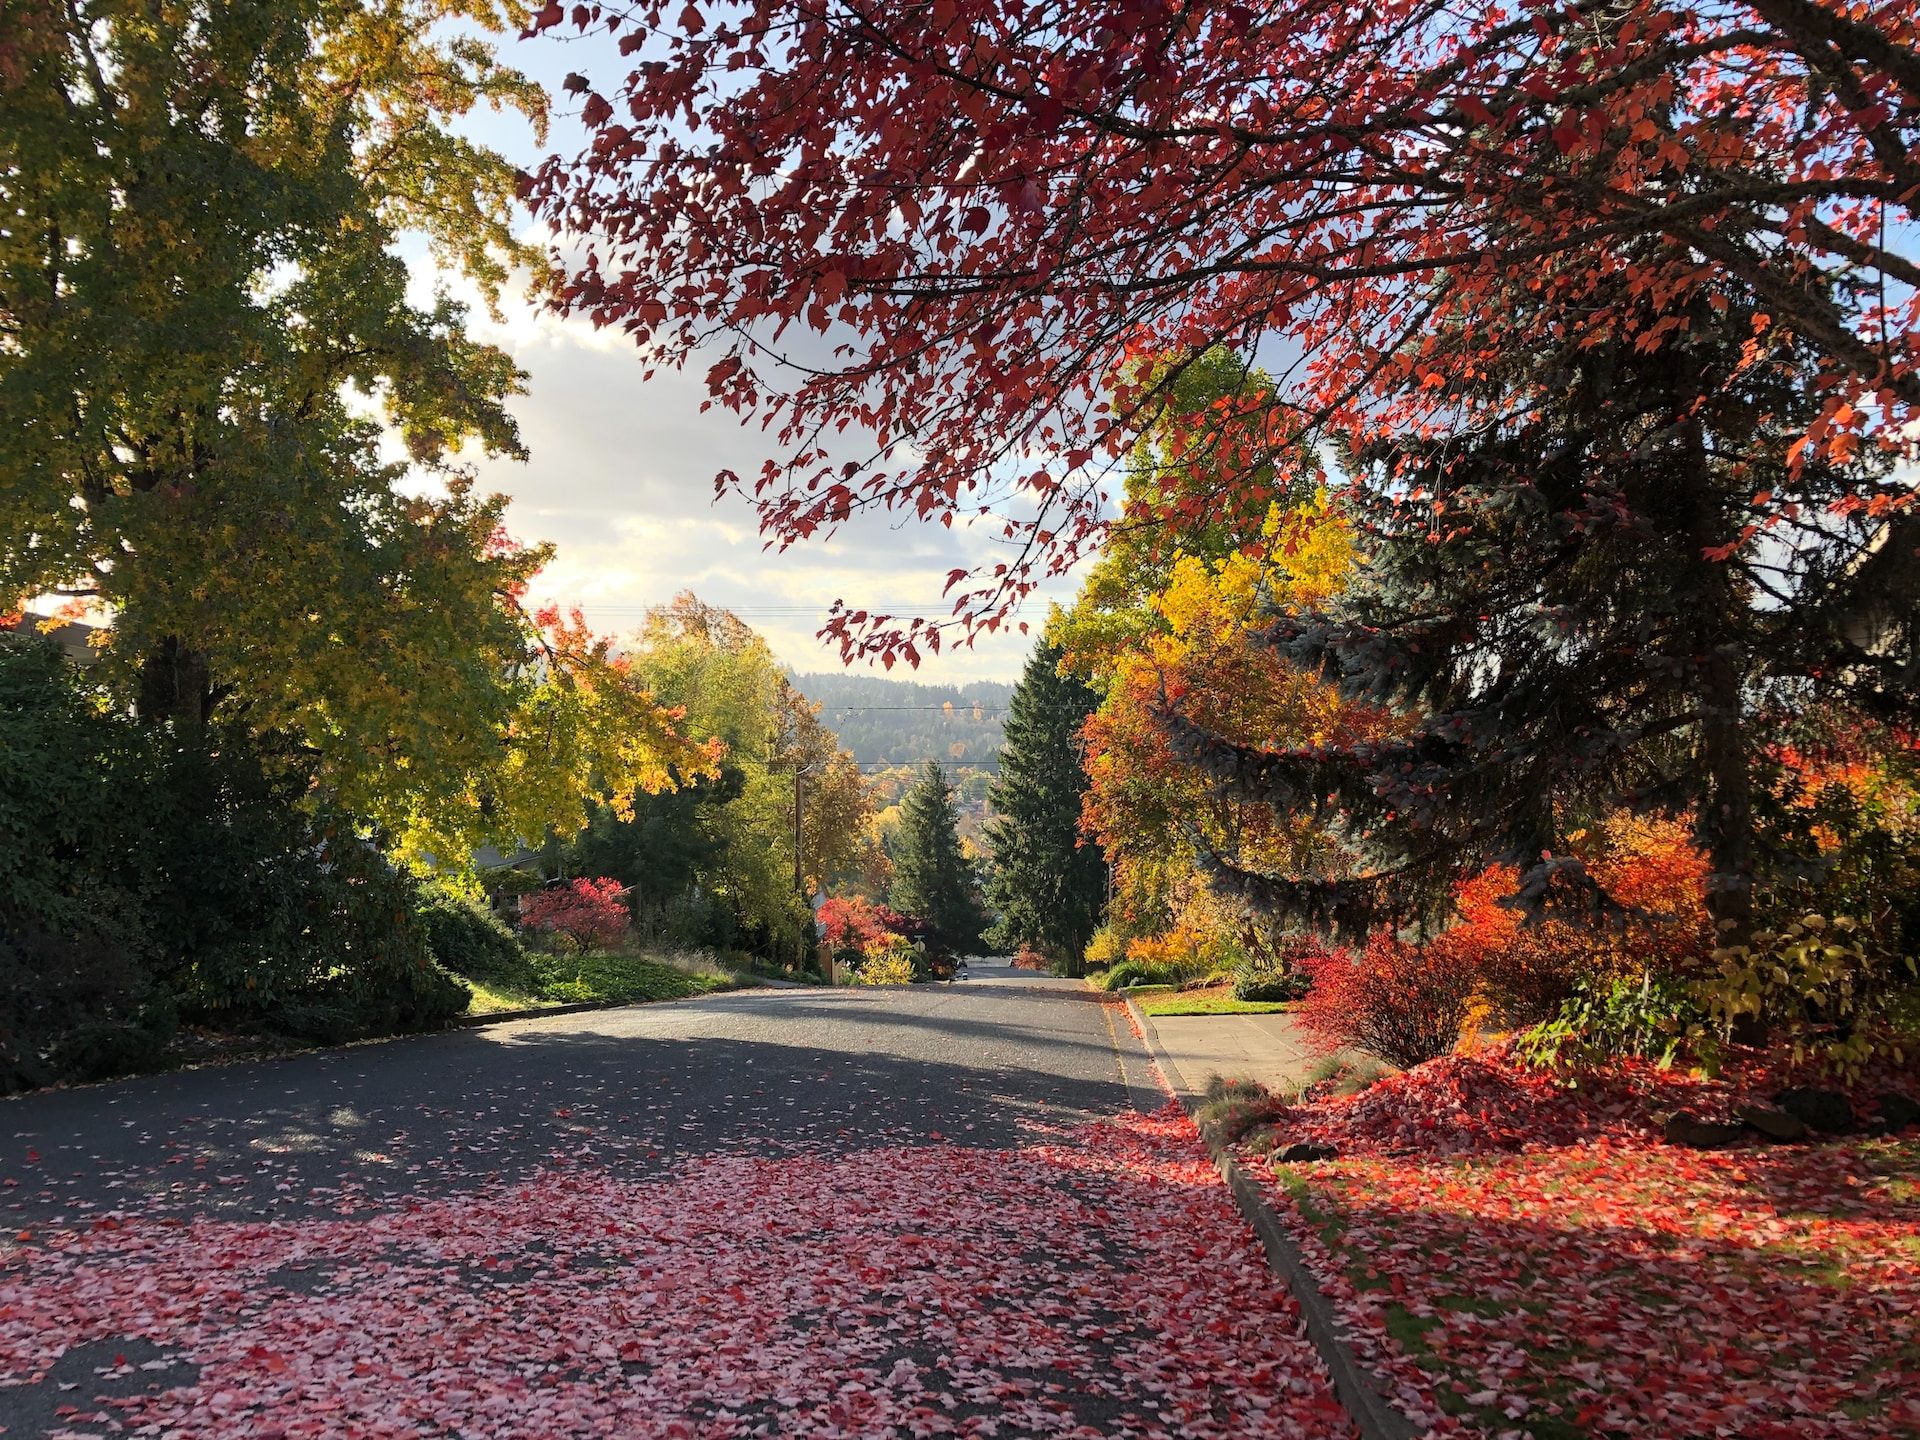 A street in Eugene during autumn